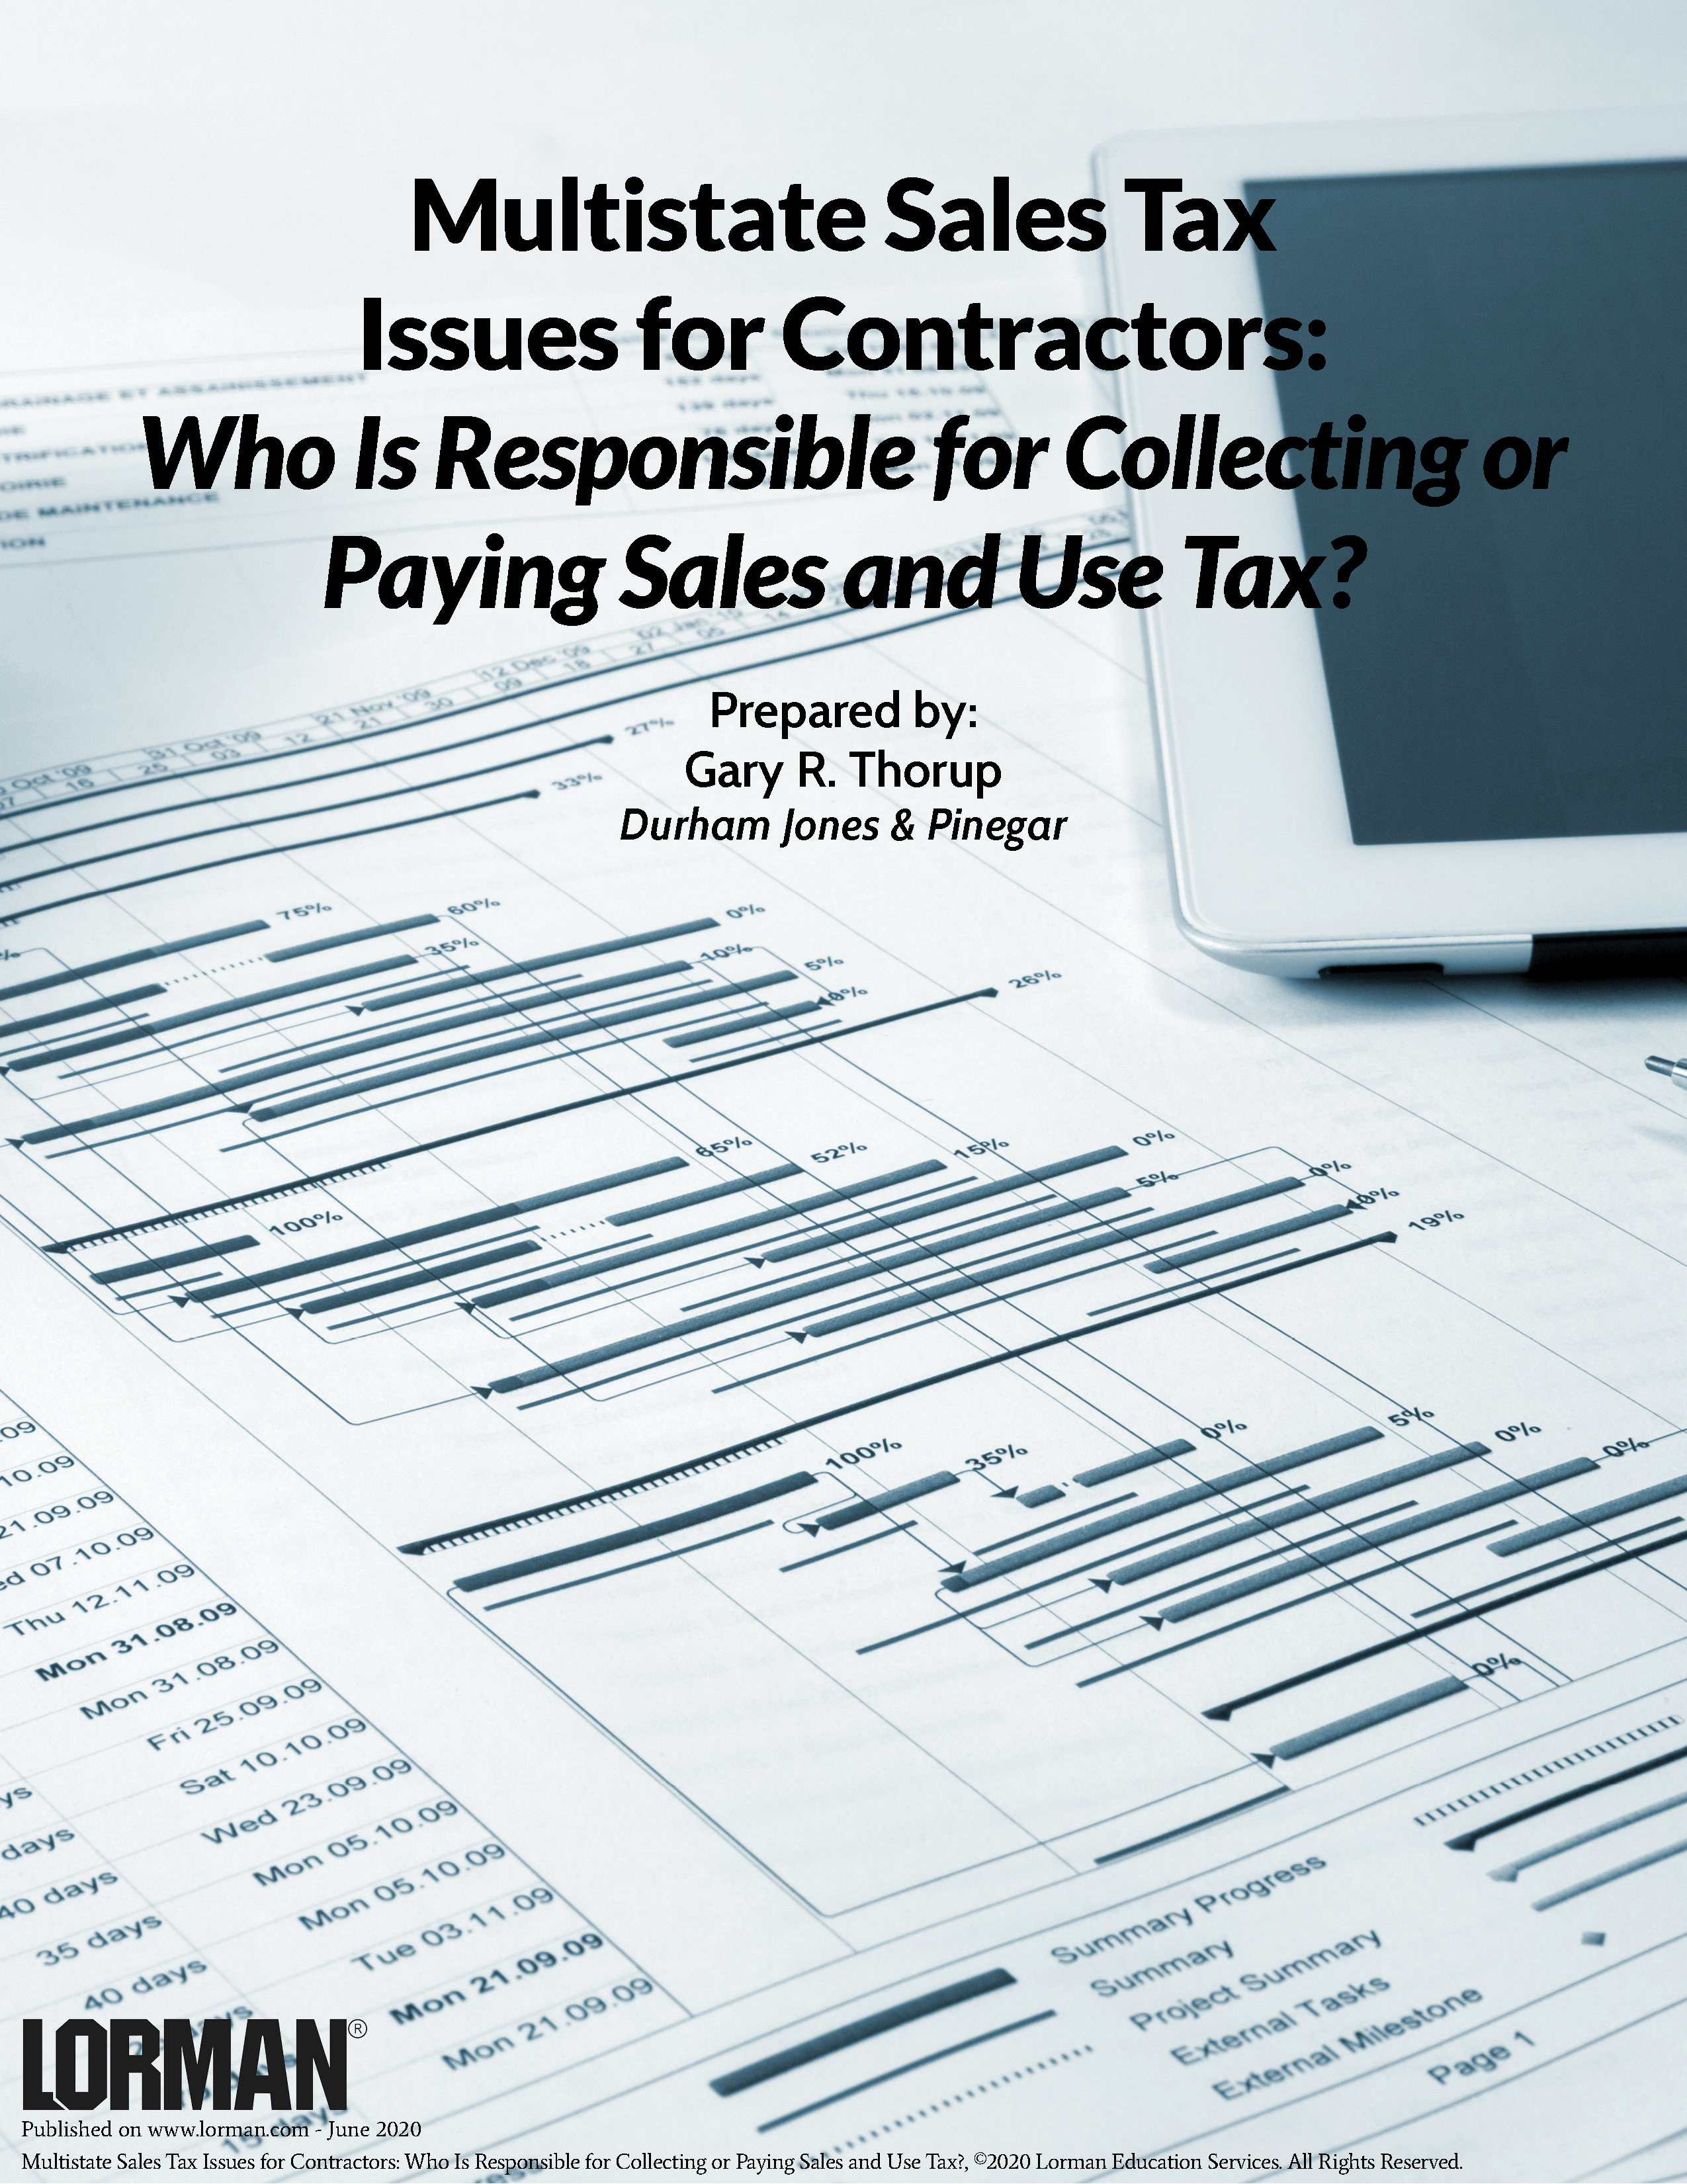 Multistate Sales Tax Issues for Contractors